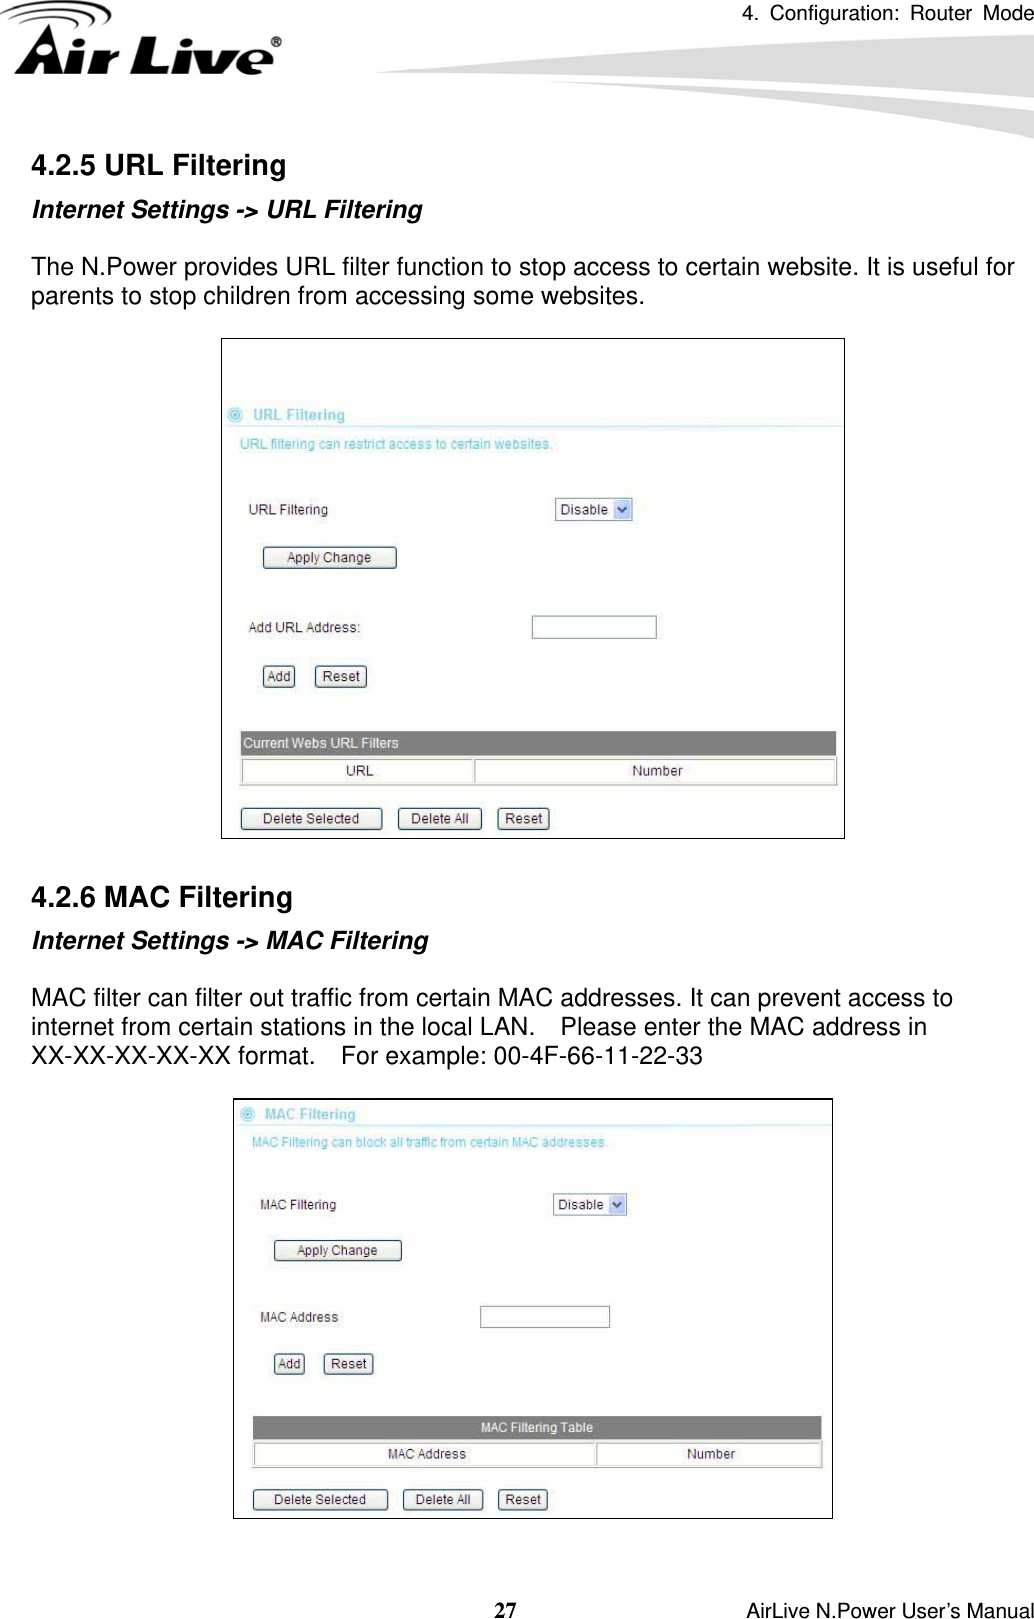 4. Configuration: Router Mode   27                    AirLive N.Power User’s Manual 4.2.5 URL Filtering Internet Settings -&gt; URL Filtering  The N.Power provides URL filter function to stop access to certain website. It is useful for parents to stop children from accessing some websites.    4.2.6 MAC Filtering Internet Settings -&gt; MAC Filtering  MAC filter can filter out traffic from certain MAC addresses. It can prevent access to internet from certain stations in the local LAN.    Please enter the MAC address in XX-XX-XX-XX-XX format.  For example: 00-4F-66-11-22-33    